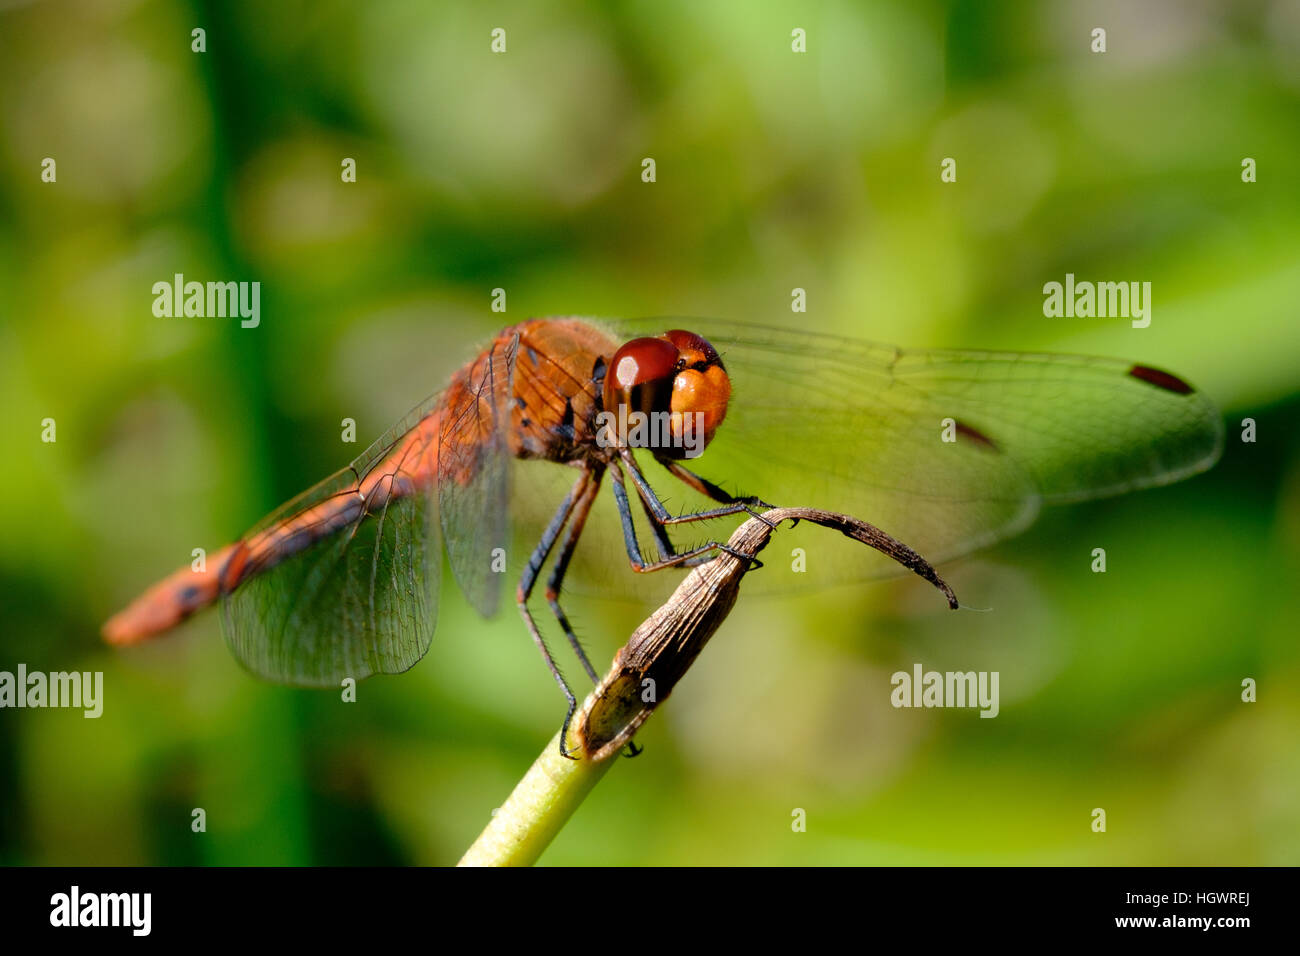 Close shot of a dragonfly resting perched on the tip of a plant stem with focus on the red eye that is reflecting the sun, about to take off. Stock Photo